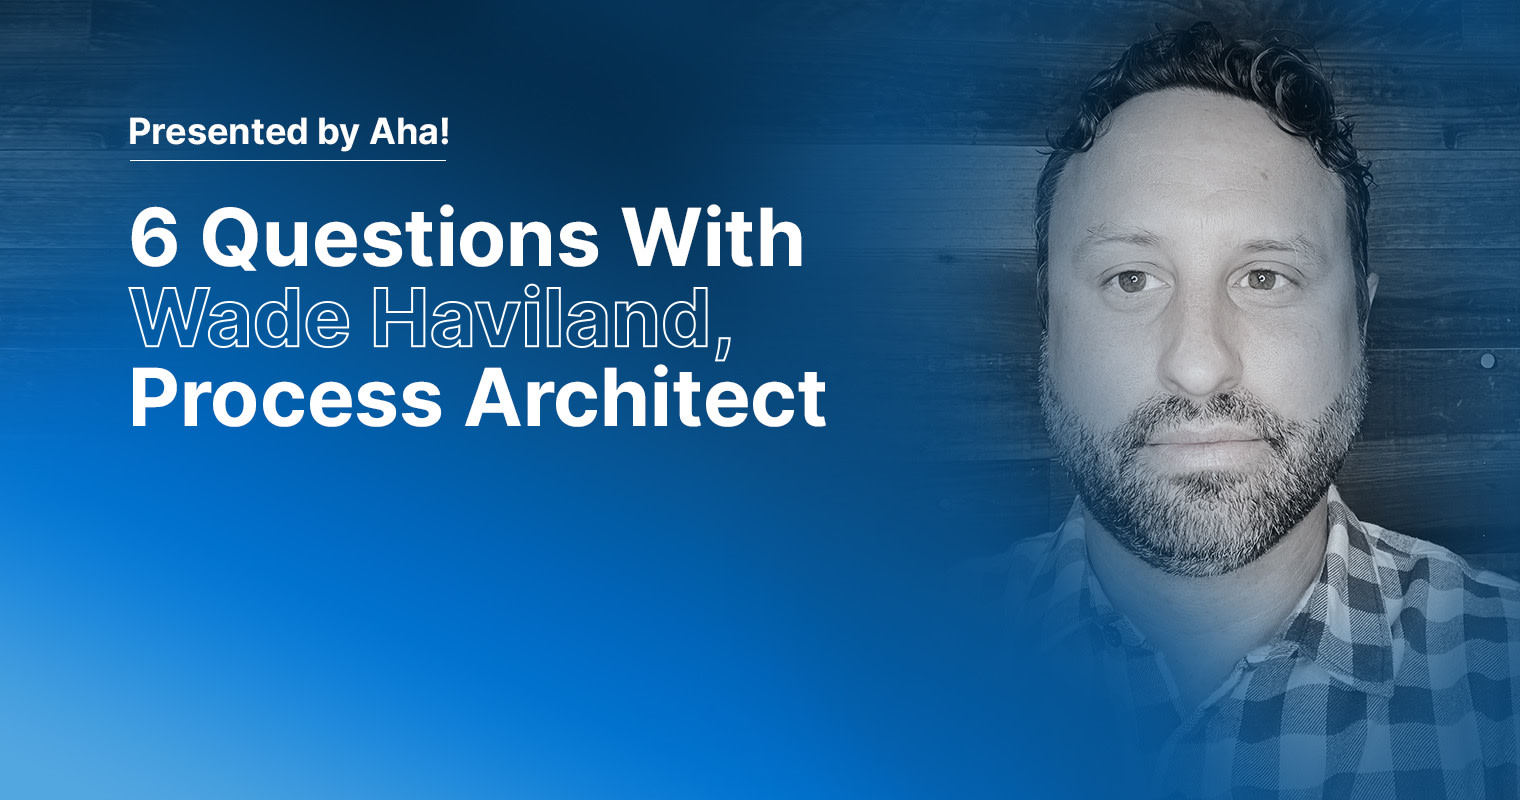 6 Questions With Wade Haviland, Process Architect